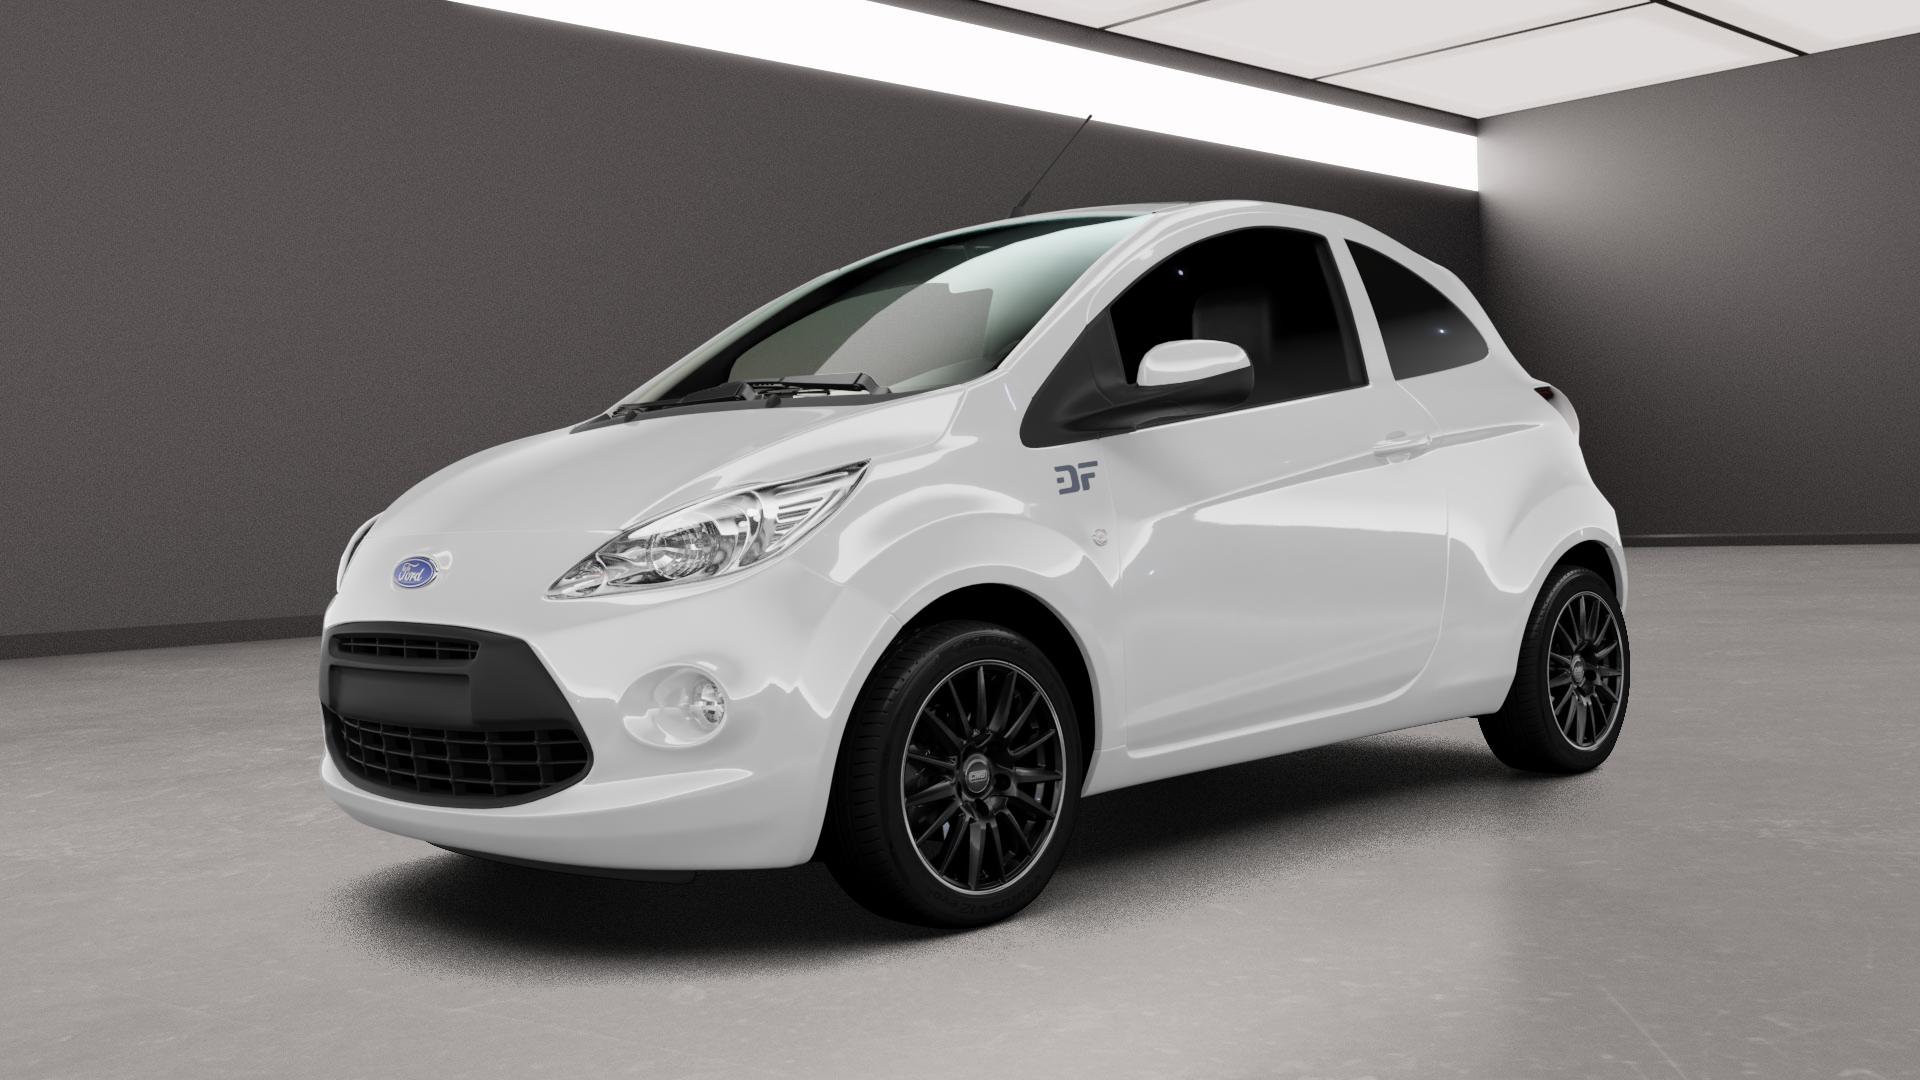 Ford KA Type RU8 1,2l 51kW (69 hp) Wheels and Tyre Packages